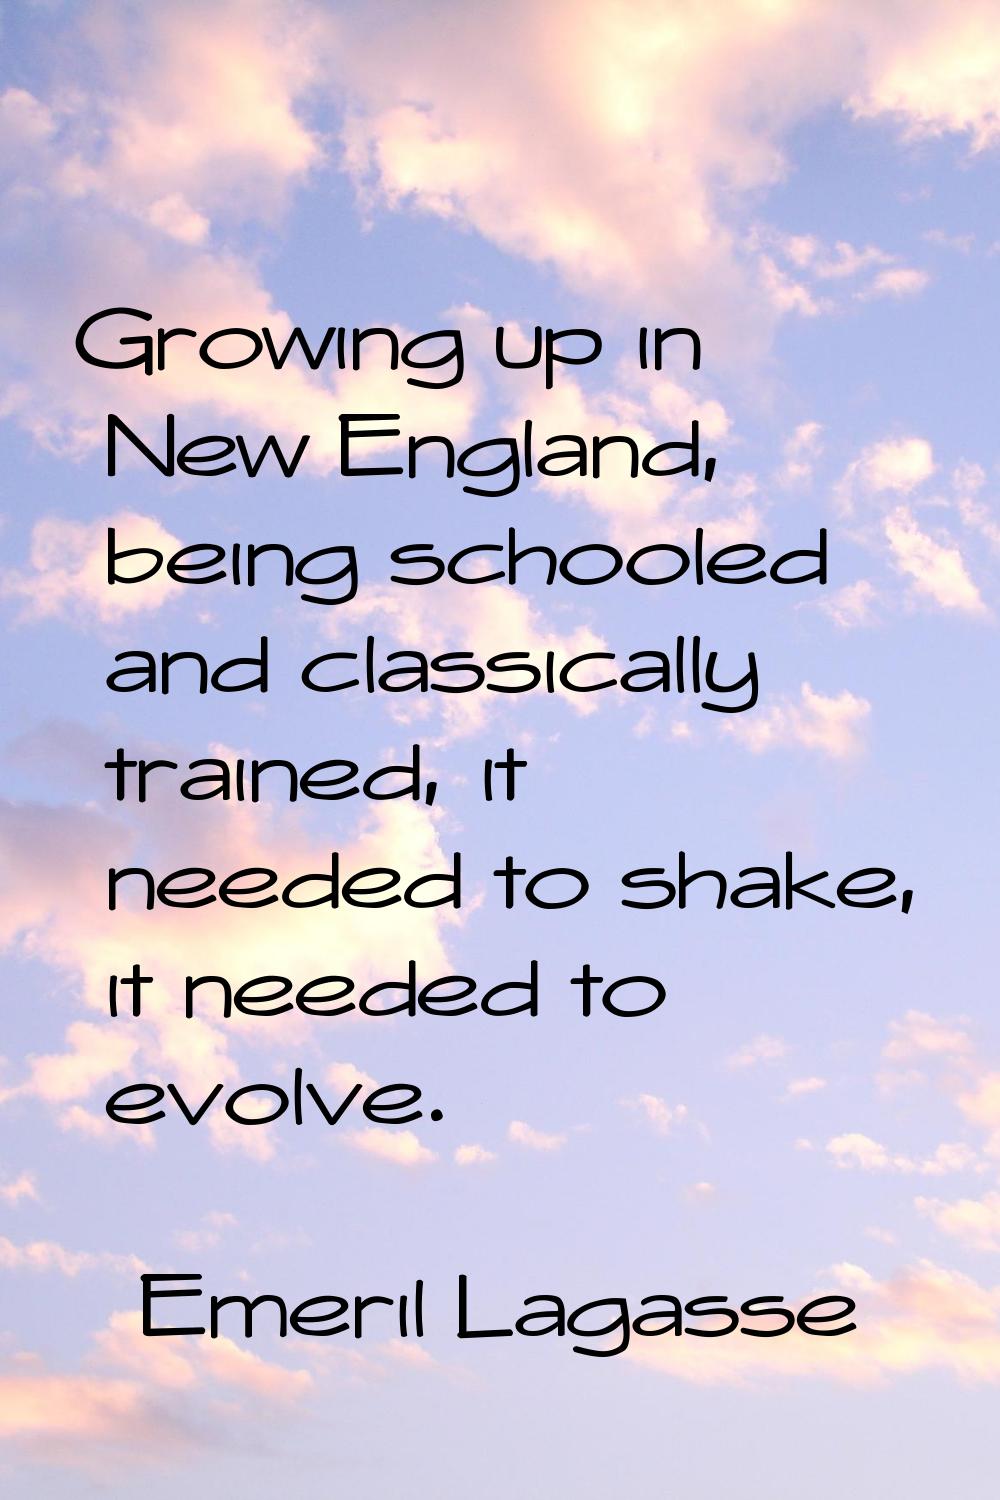 Growing up in New England, being schooled and classically trained, it needed to shake, it needed to